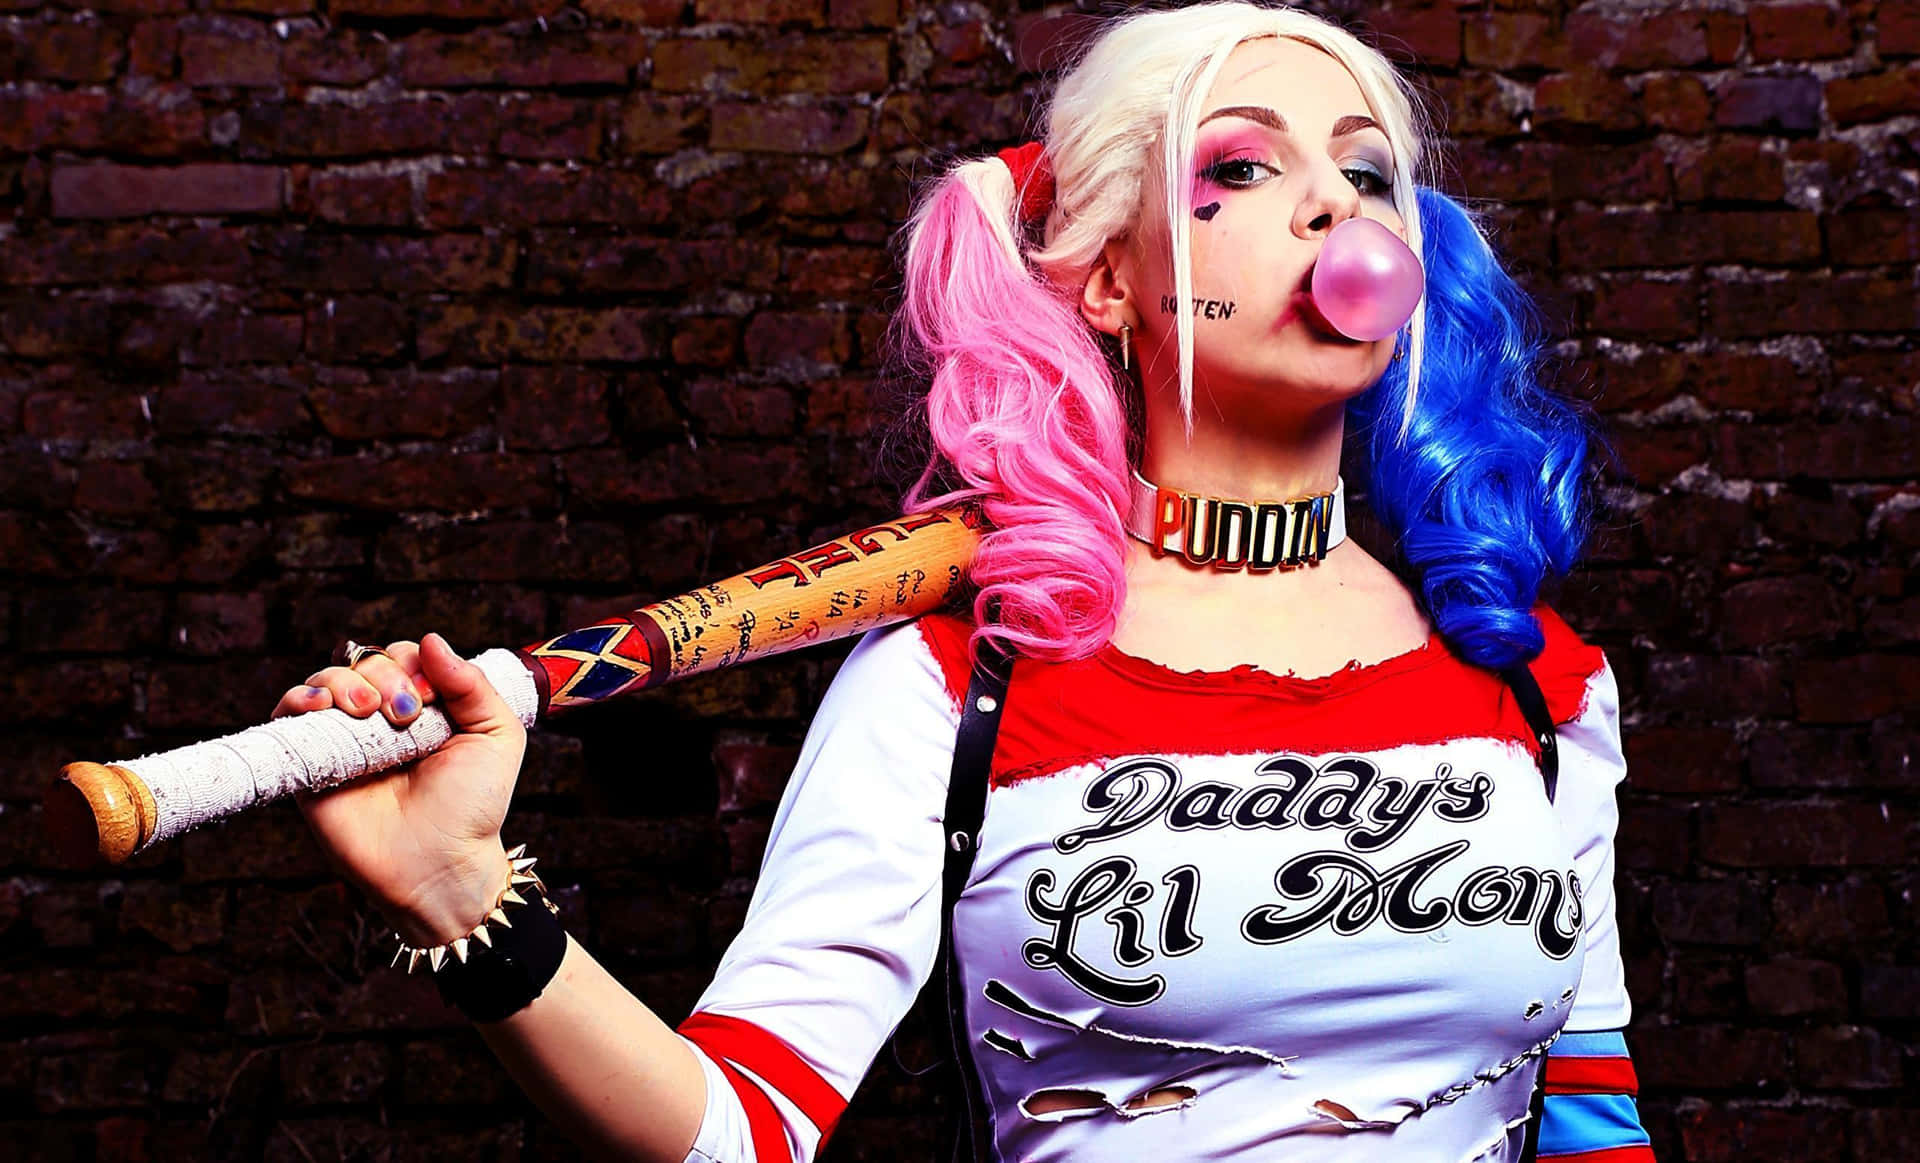 Harley Quinn holding her iconic baseball bat in a powerful stance Wallpaper